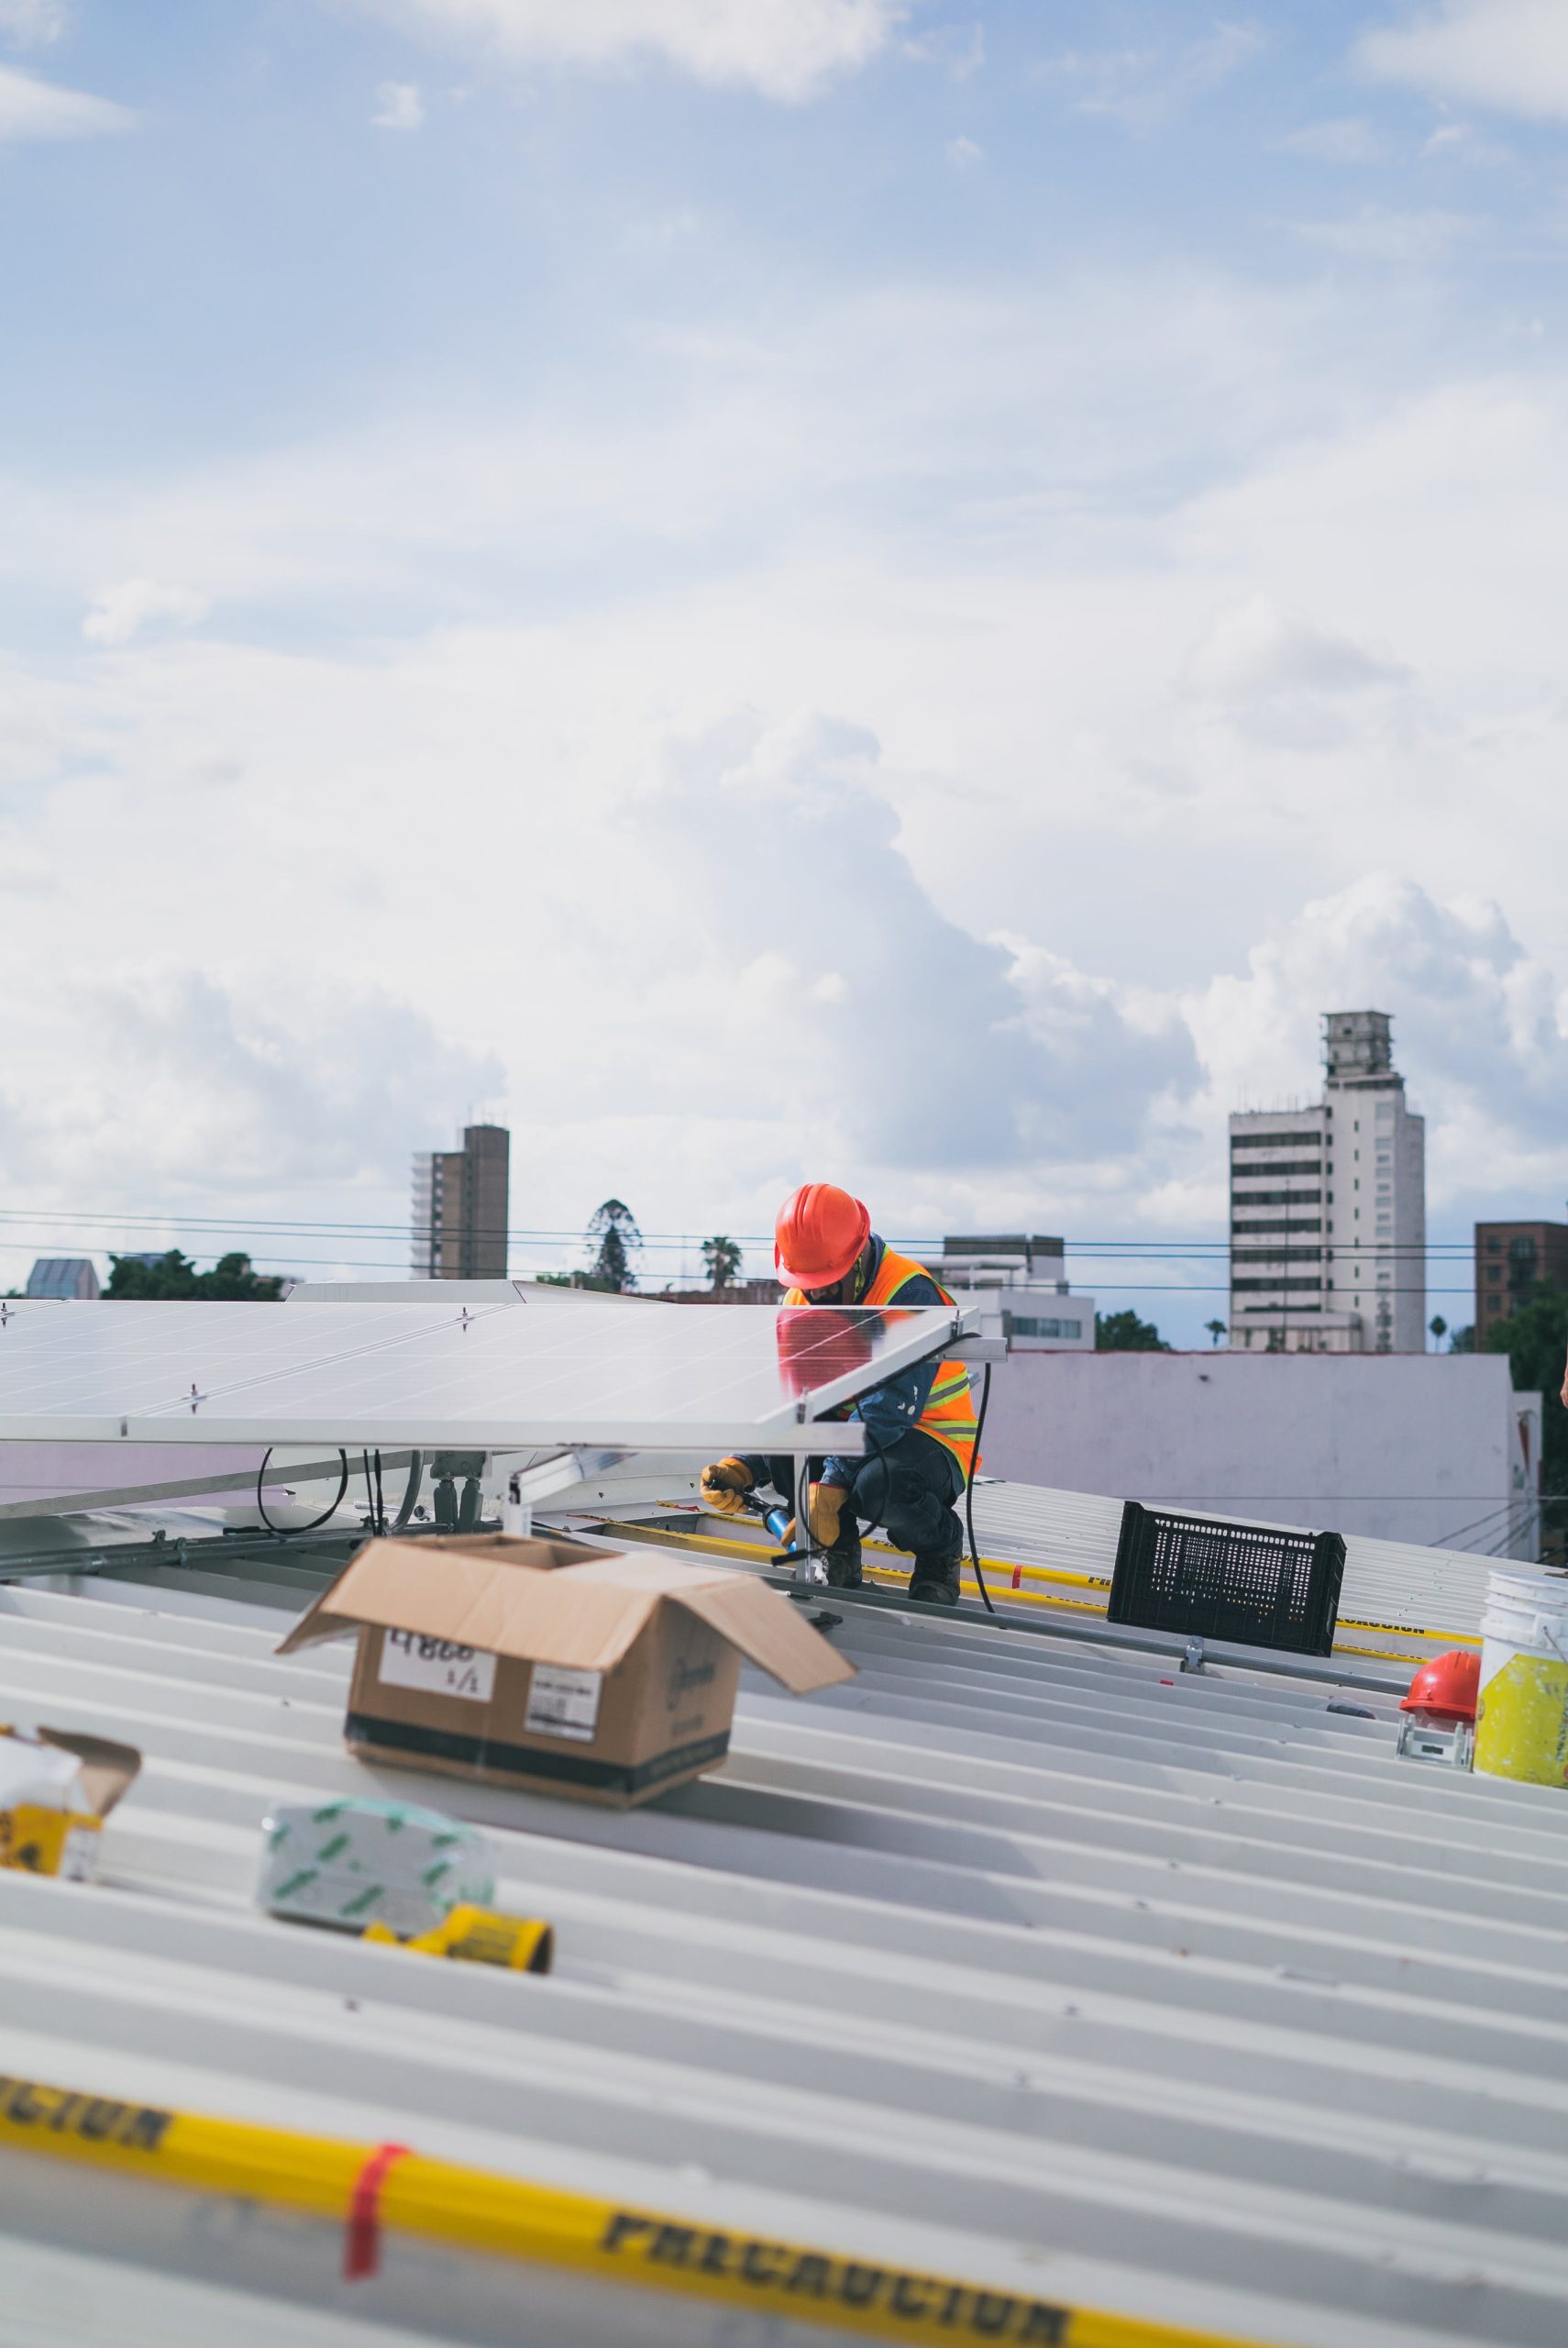 electrician on roof, gps fleet tracking dispatch